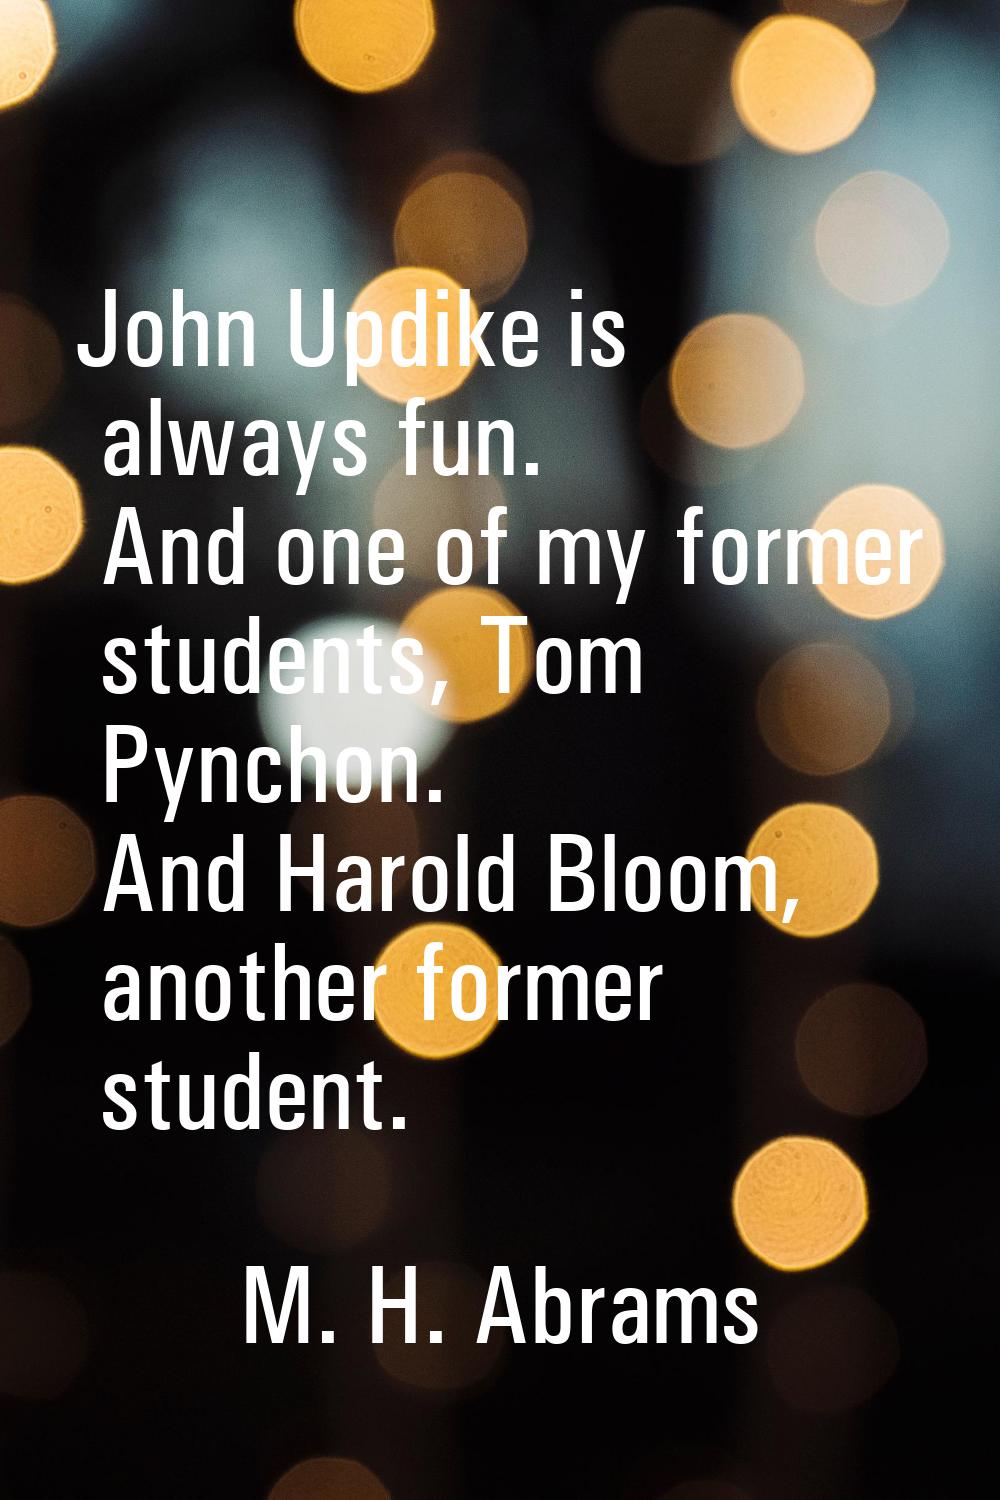 John Updike is always fun. And one of my former students, Tom Pynchon. And Harold Bloom, another fo